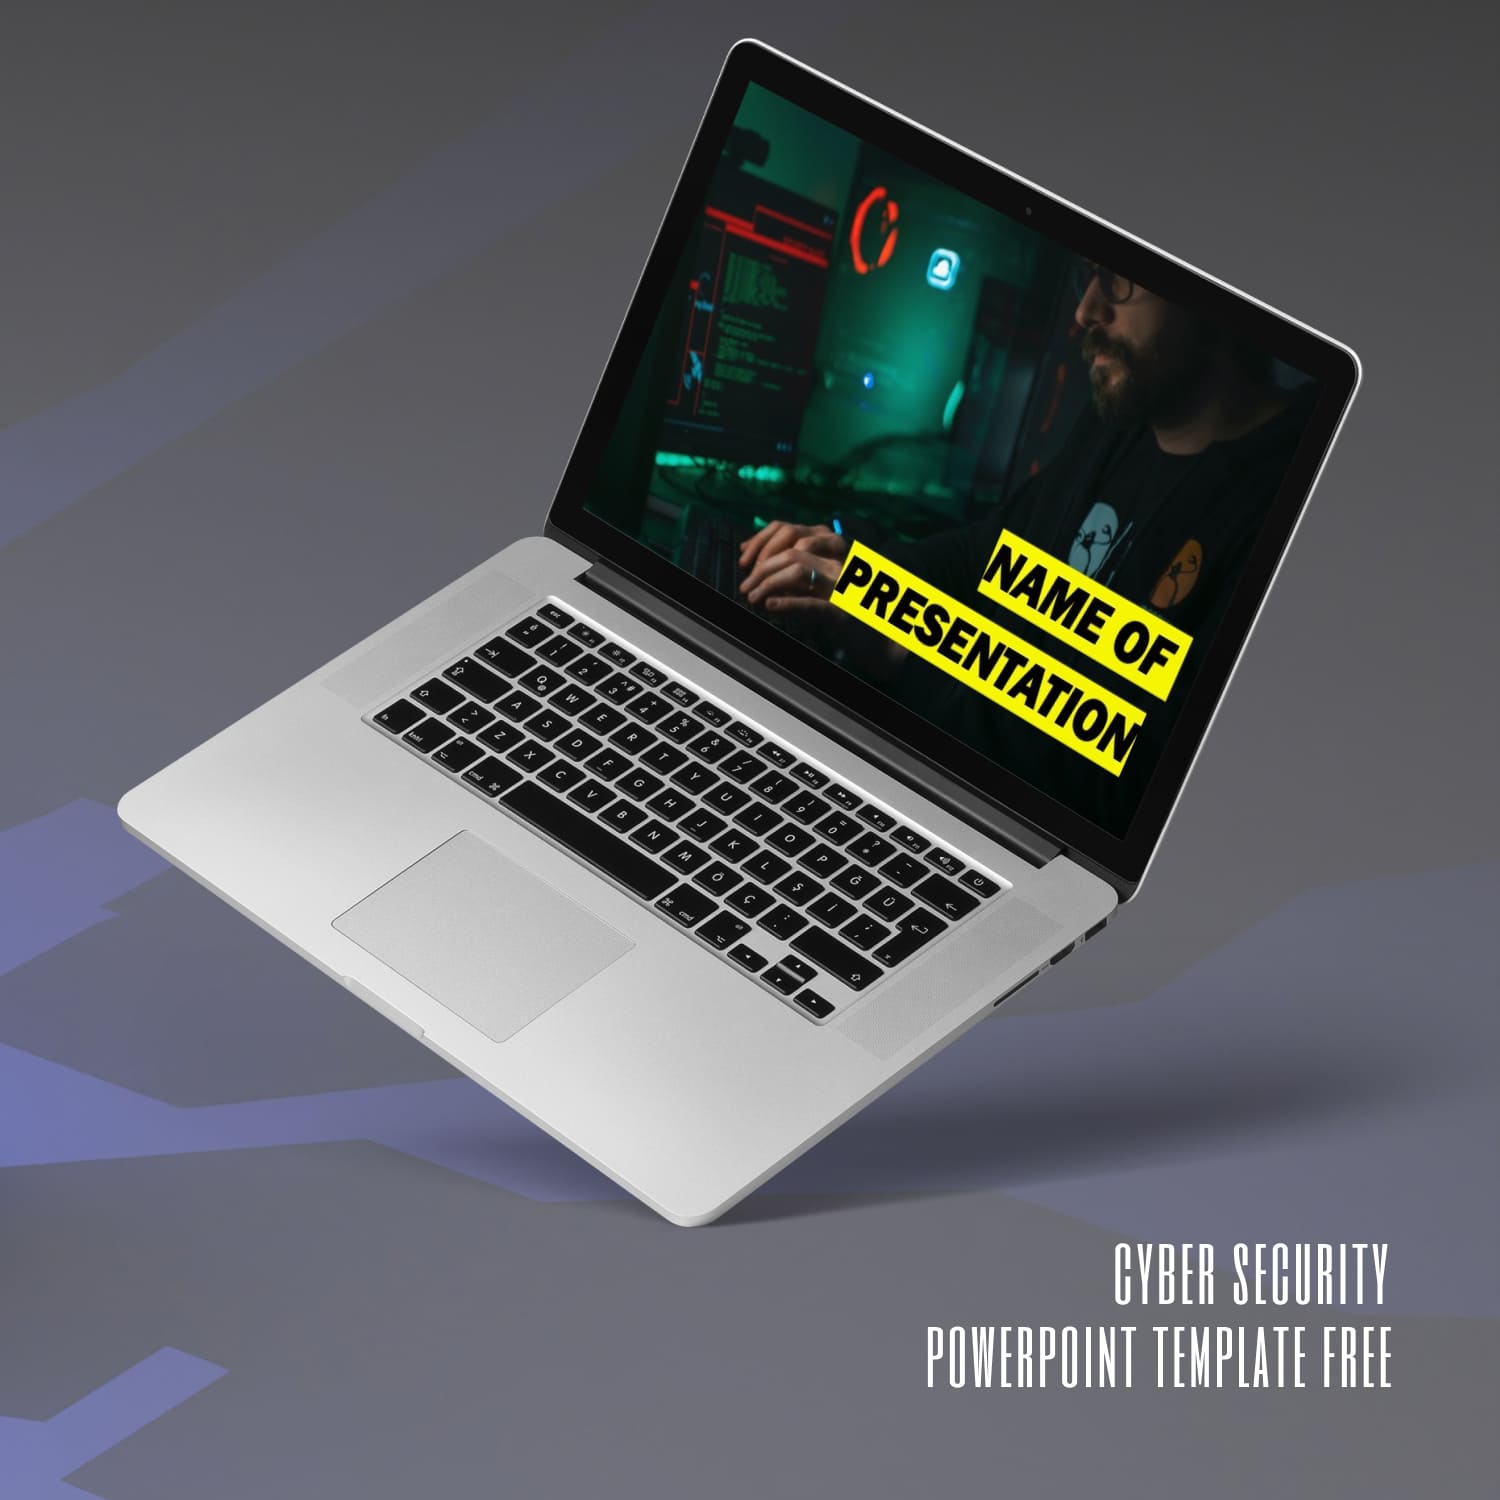 Cyber Security Powerpoint Template Free 1500 1.